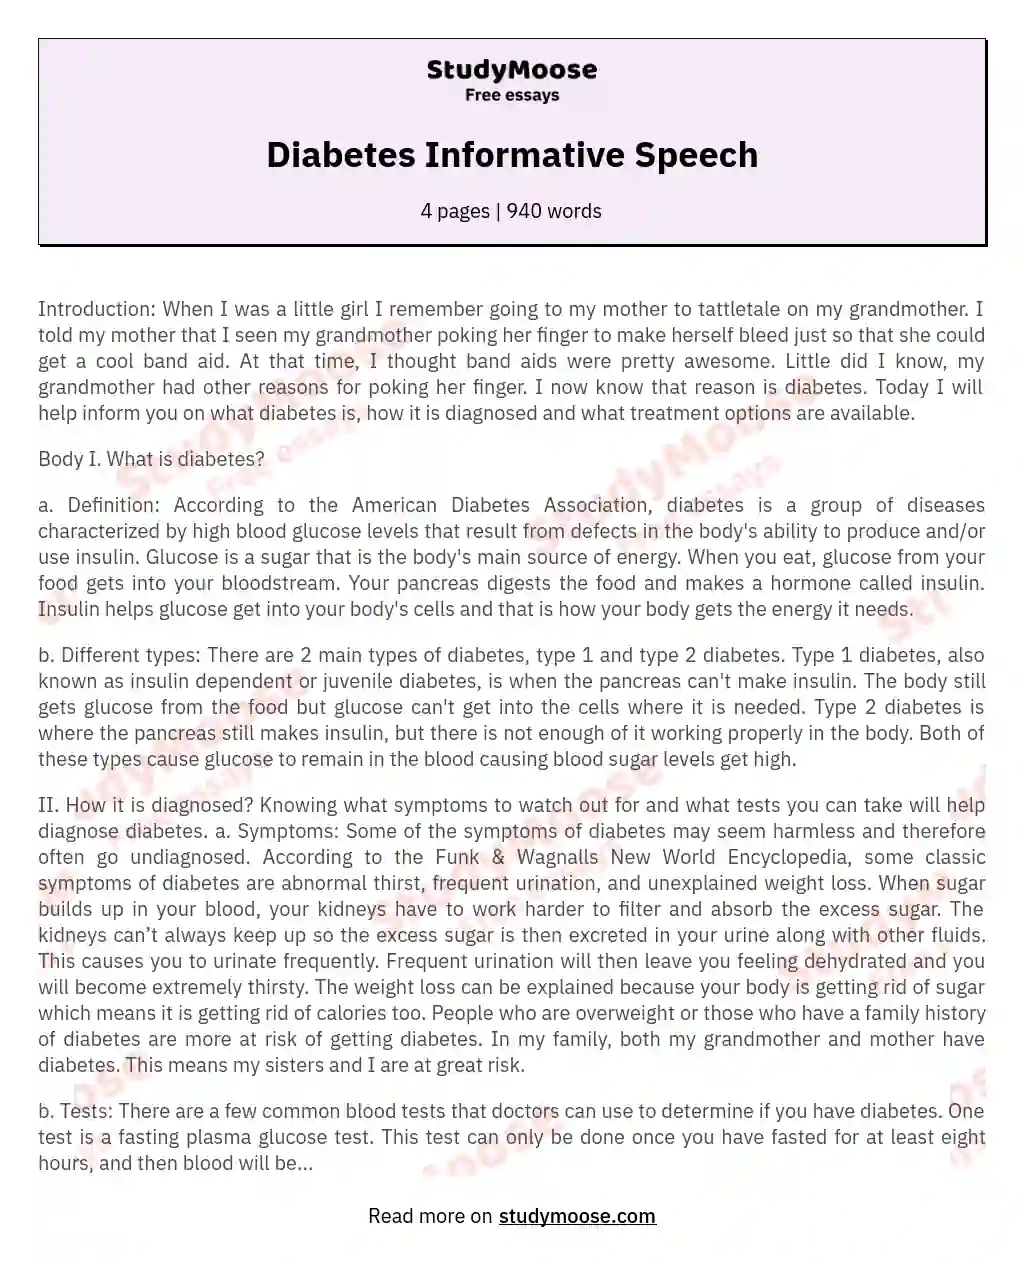 Understanding Diabetes: Diagnosis, Management, and Care essay